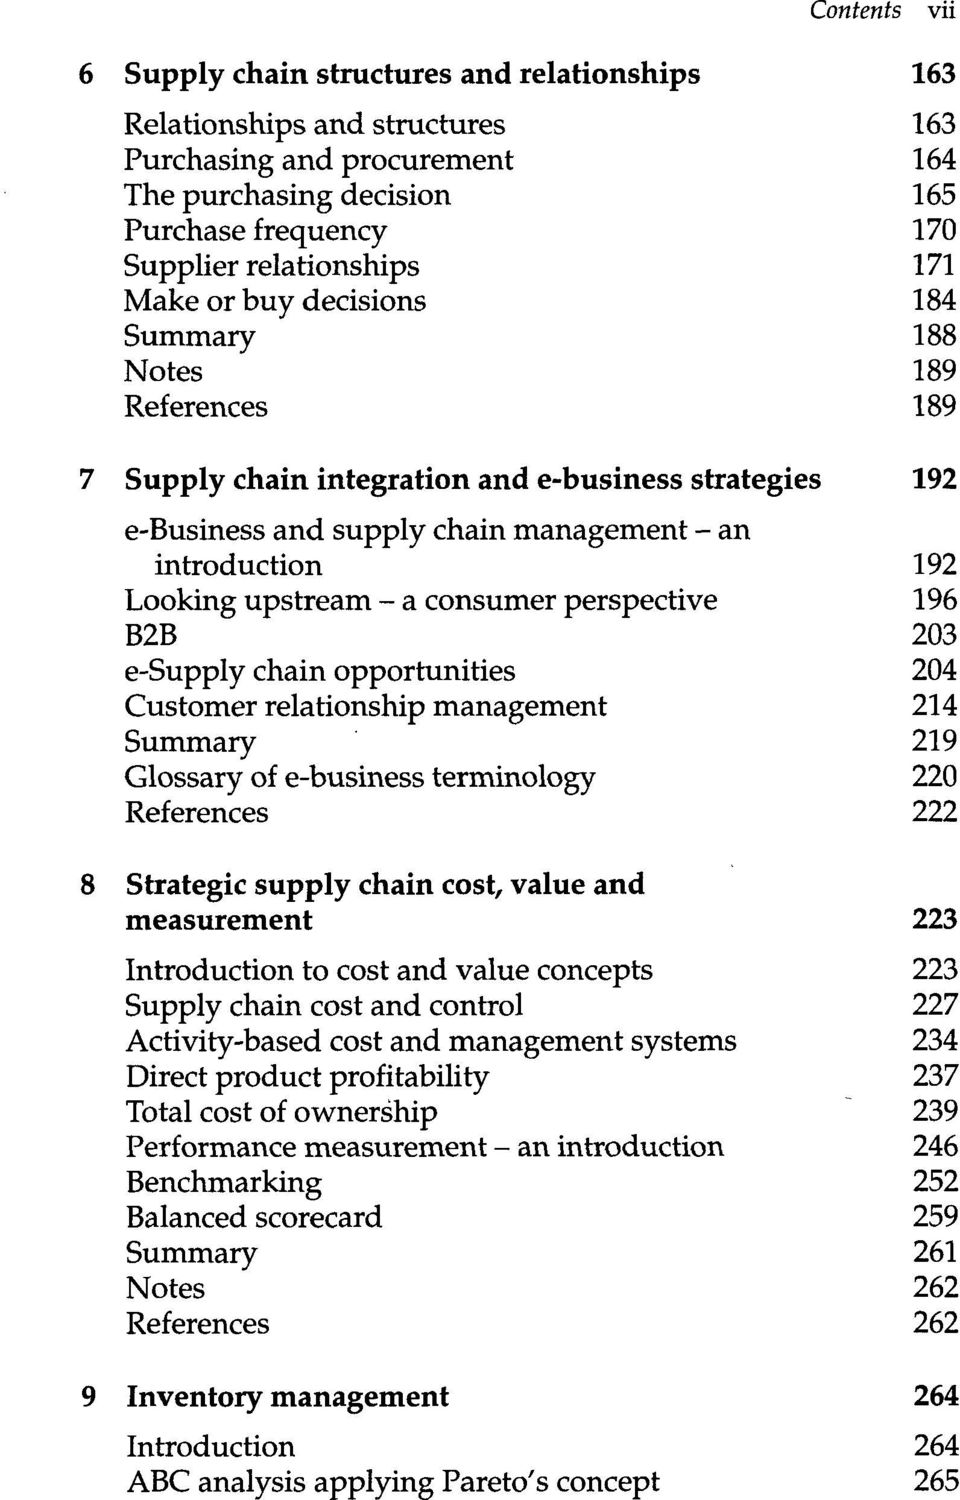 upstream - a consumer perspective 196 B2B 203 e-supply chain opportunities 204 Customer relationship management 214 Summary 219 Glossary of e-business terminology 220 References 222 8 Strategic